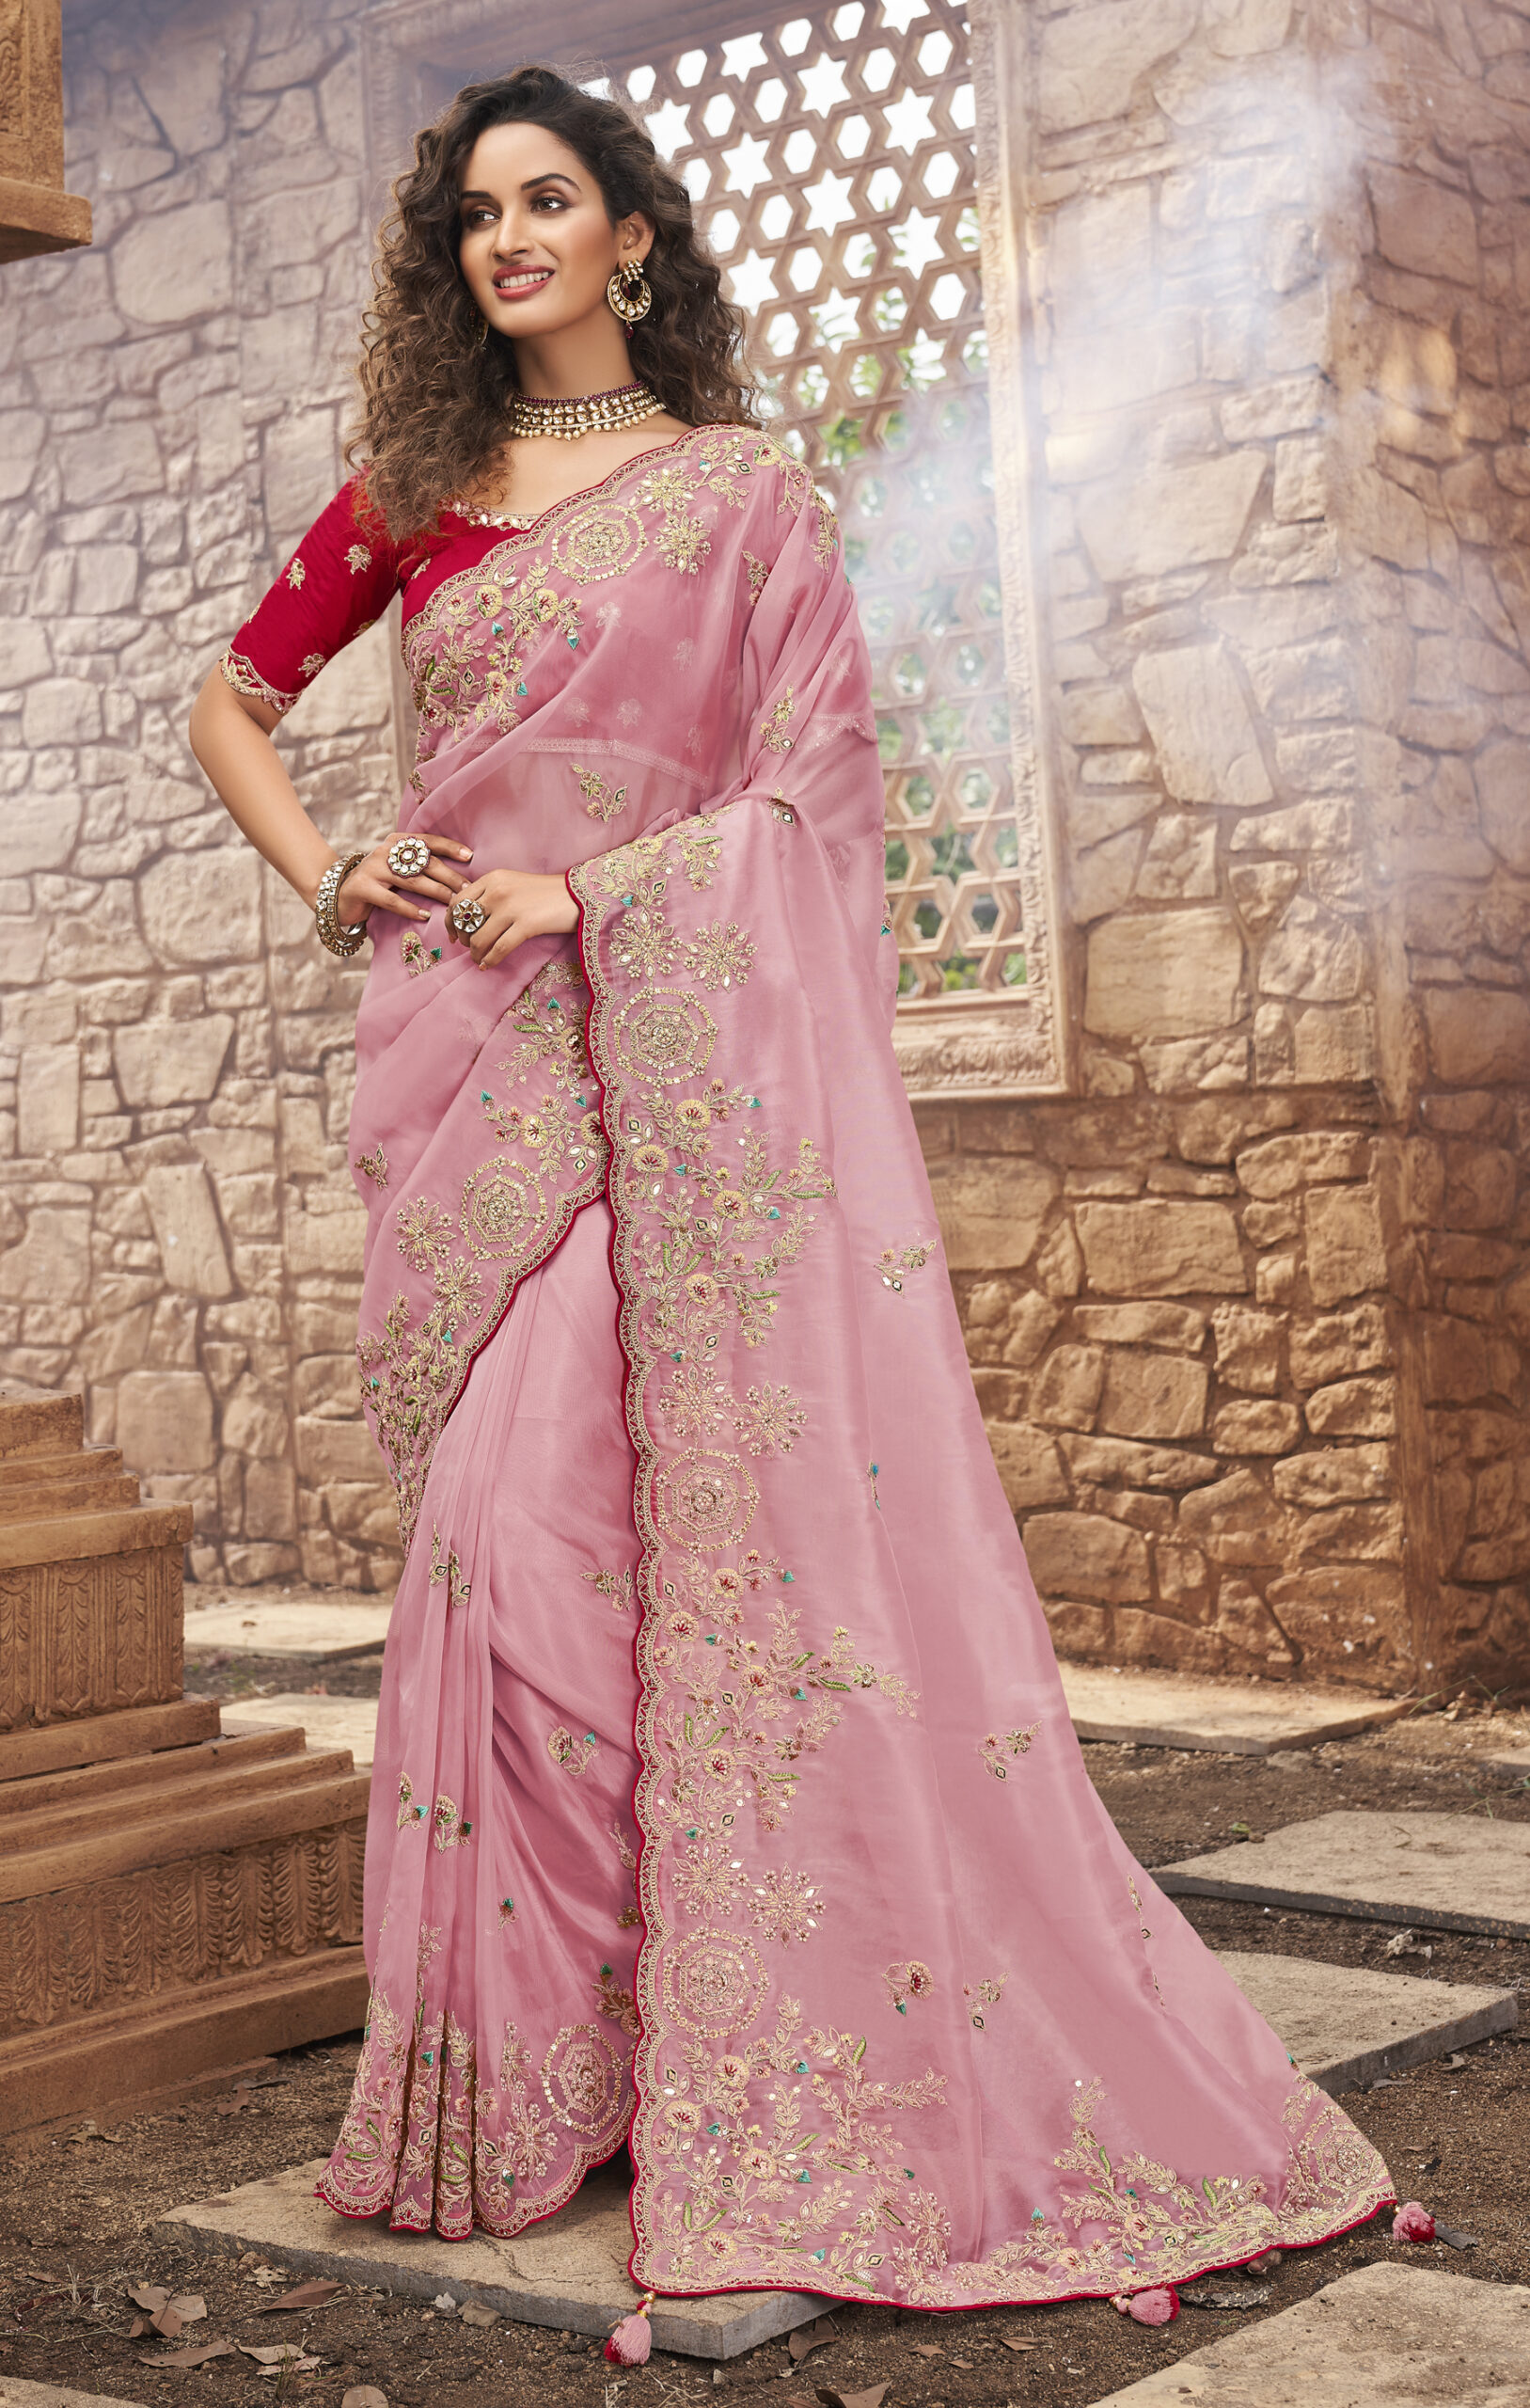 https://www.shahifits.in/wp-content/uploads/2022/06/Party-Wear-Organza-Saree-Blouse-Designs-Pink-scaled.jpg